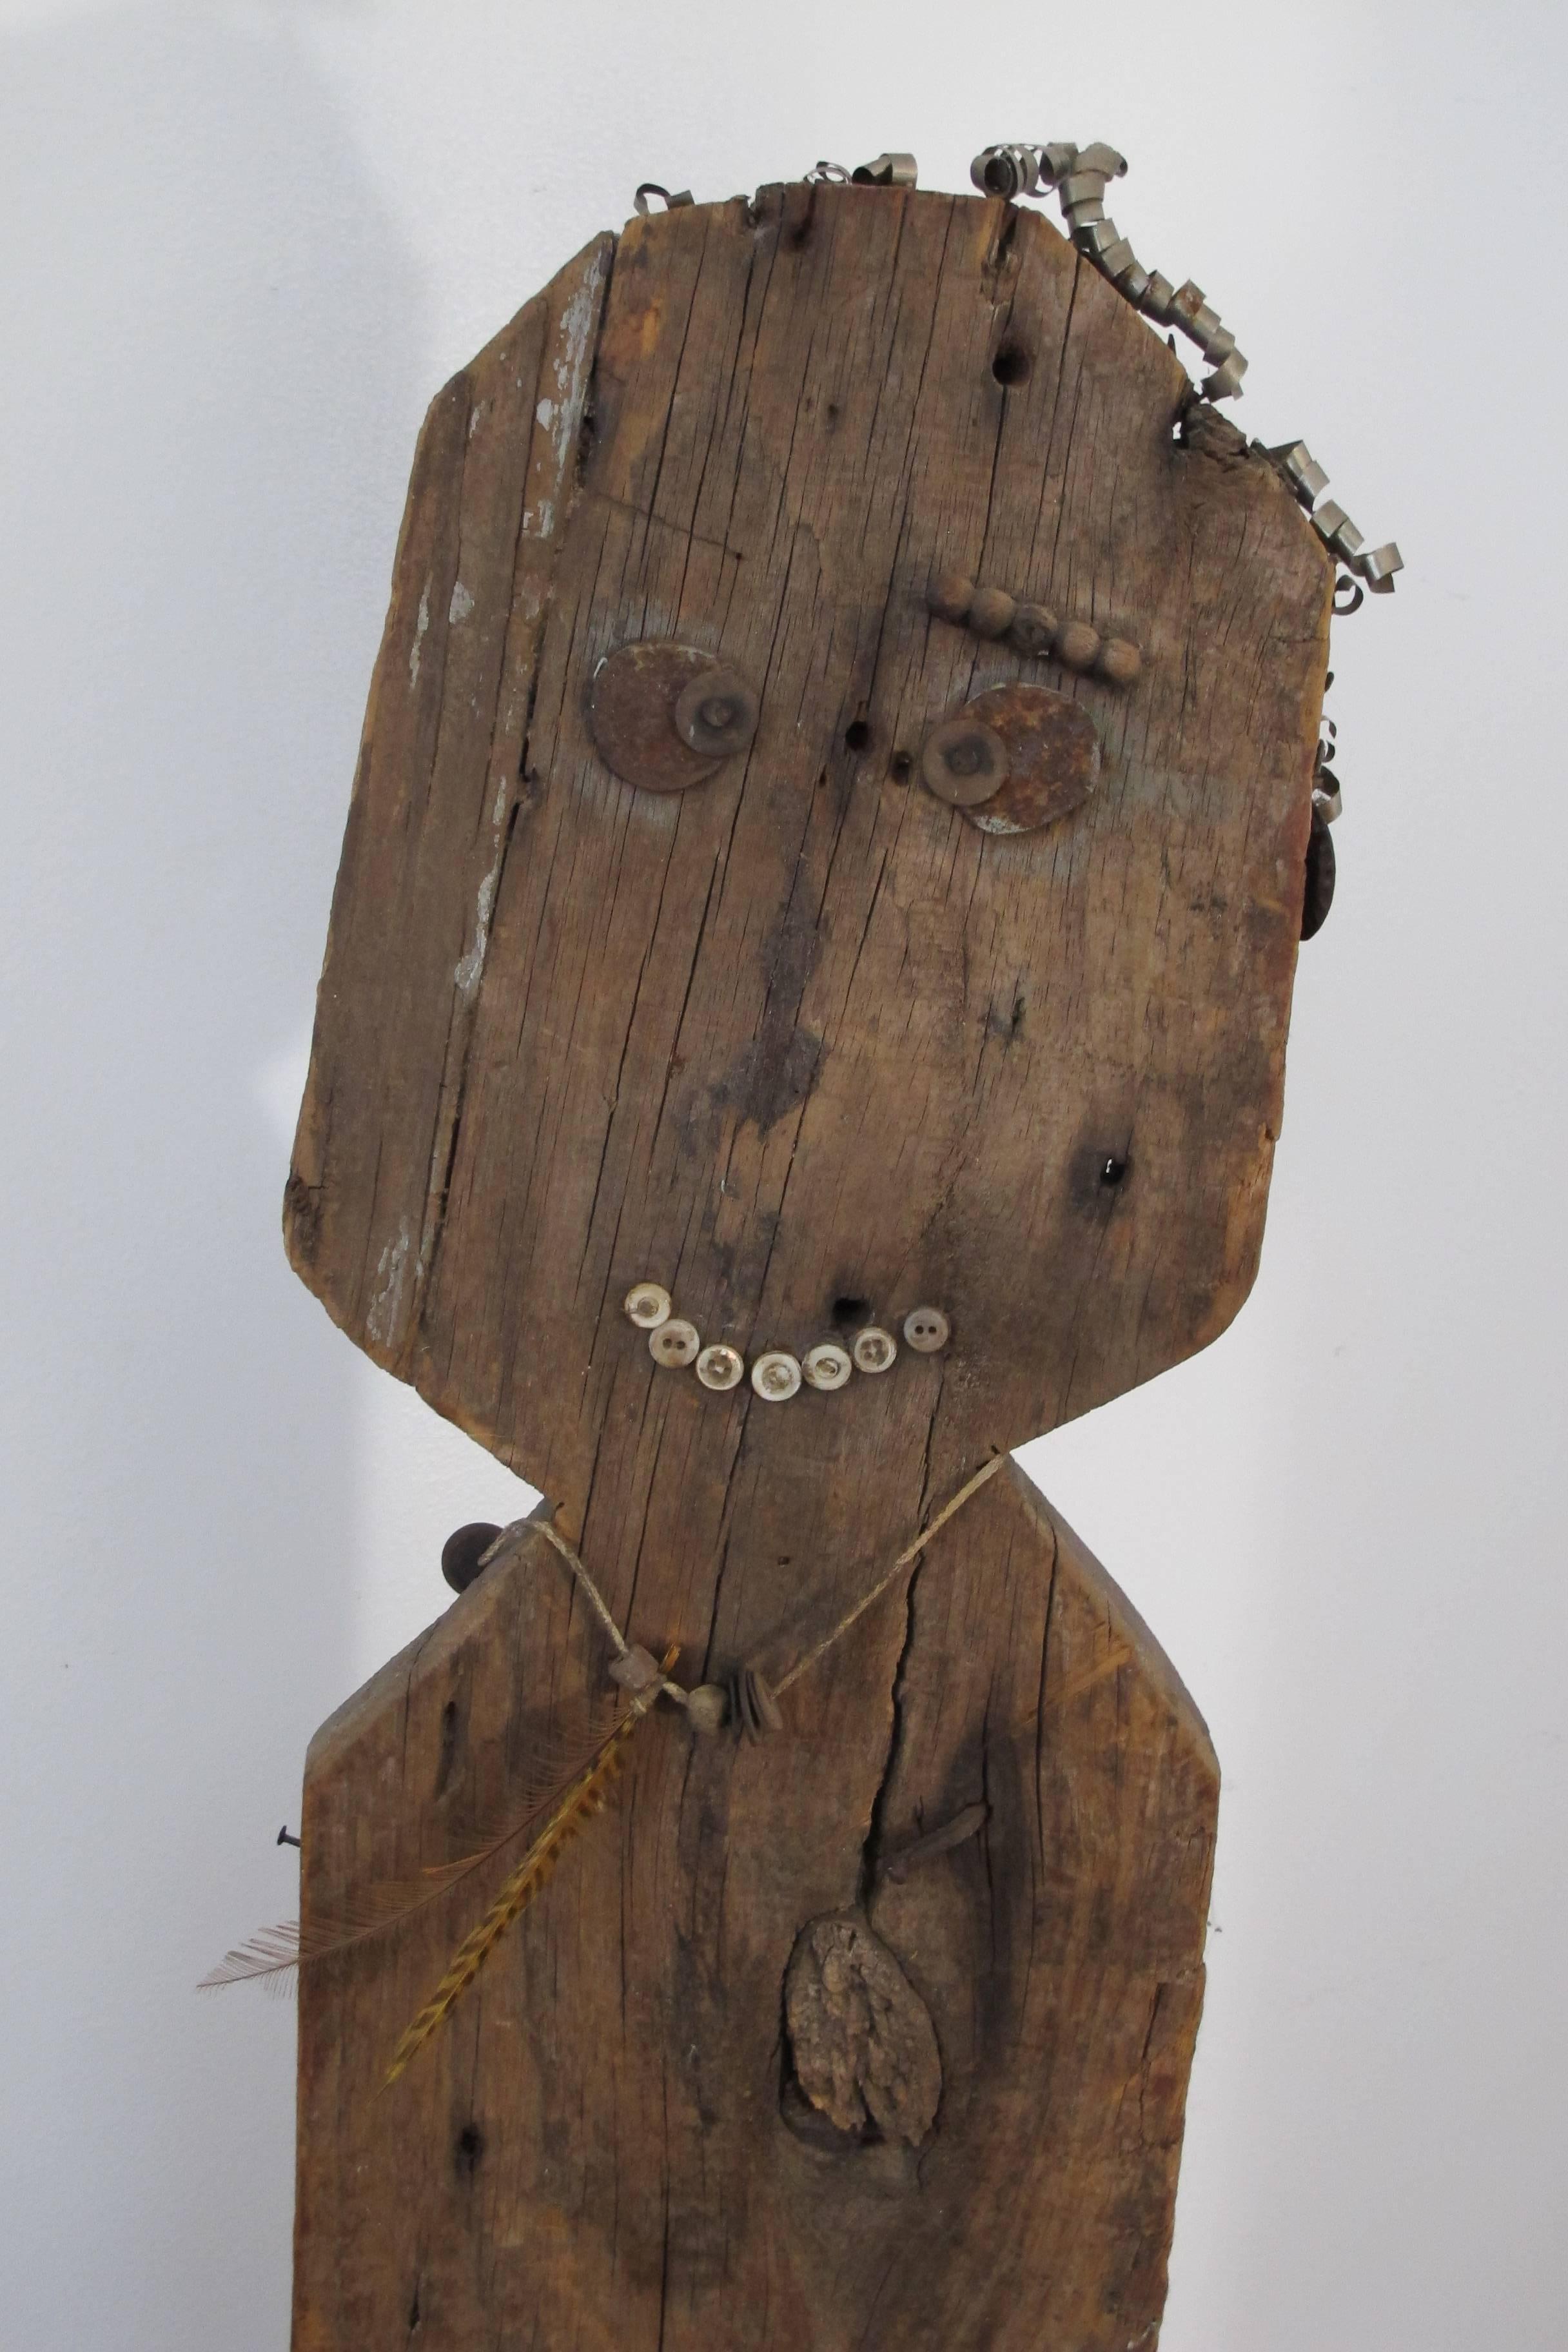 Wood yard show figure originally found in Maine. The unpainted 
figure has applied metal for eyes with buttons for eyes and curled metal for hair. There is a stringed necklace with beads and feathers. A cloth wrap serves as a loincloth. Mounted on